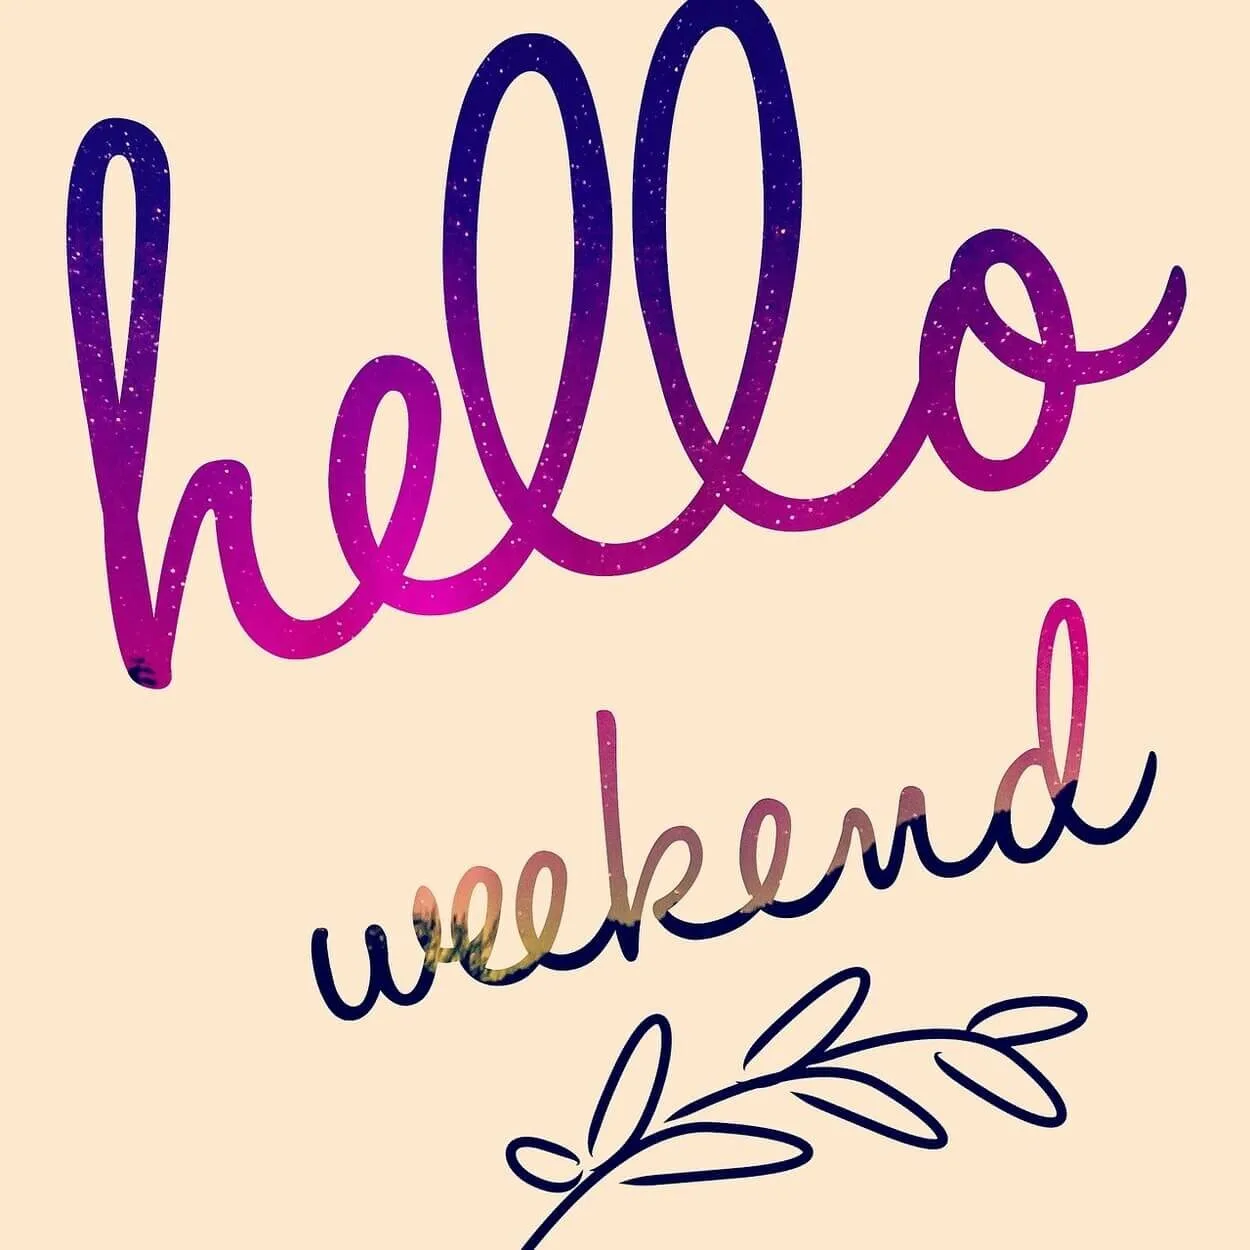 An image of hello weekend graphic.